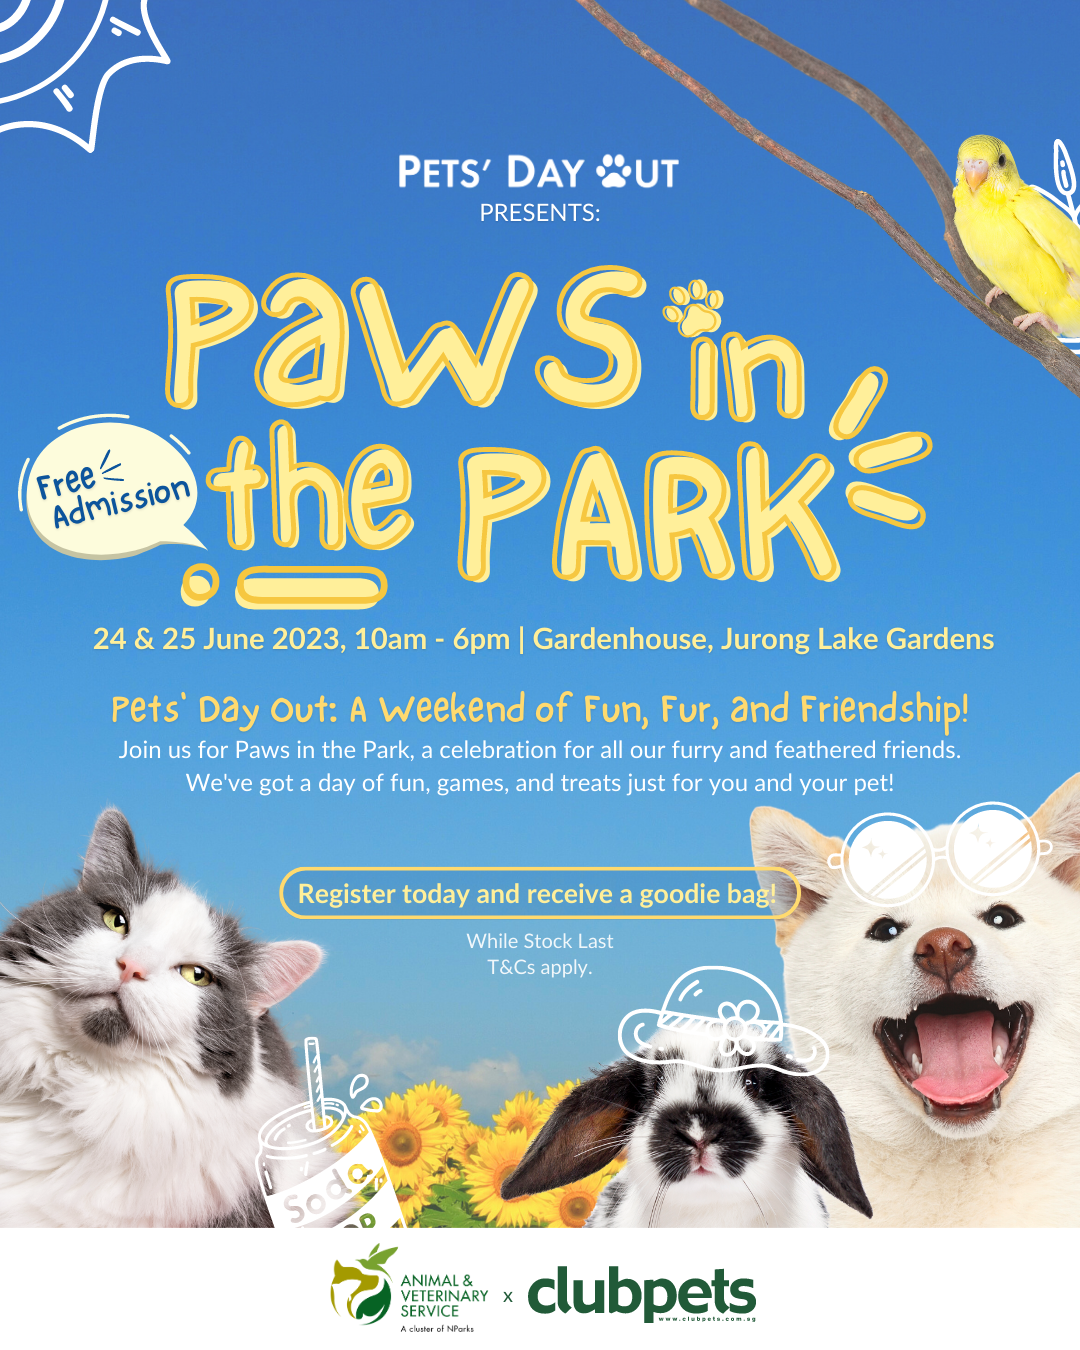 Paws in the Park prsent by Pets' Day Out x Clubpets | Pet Expo in Singapore 2023